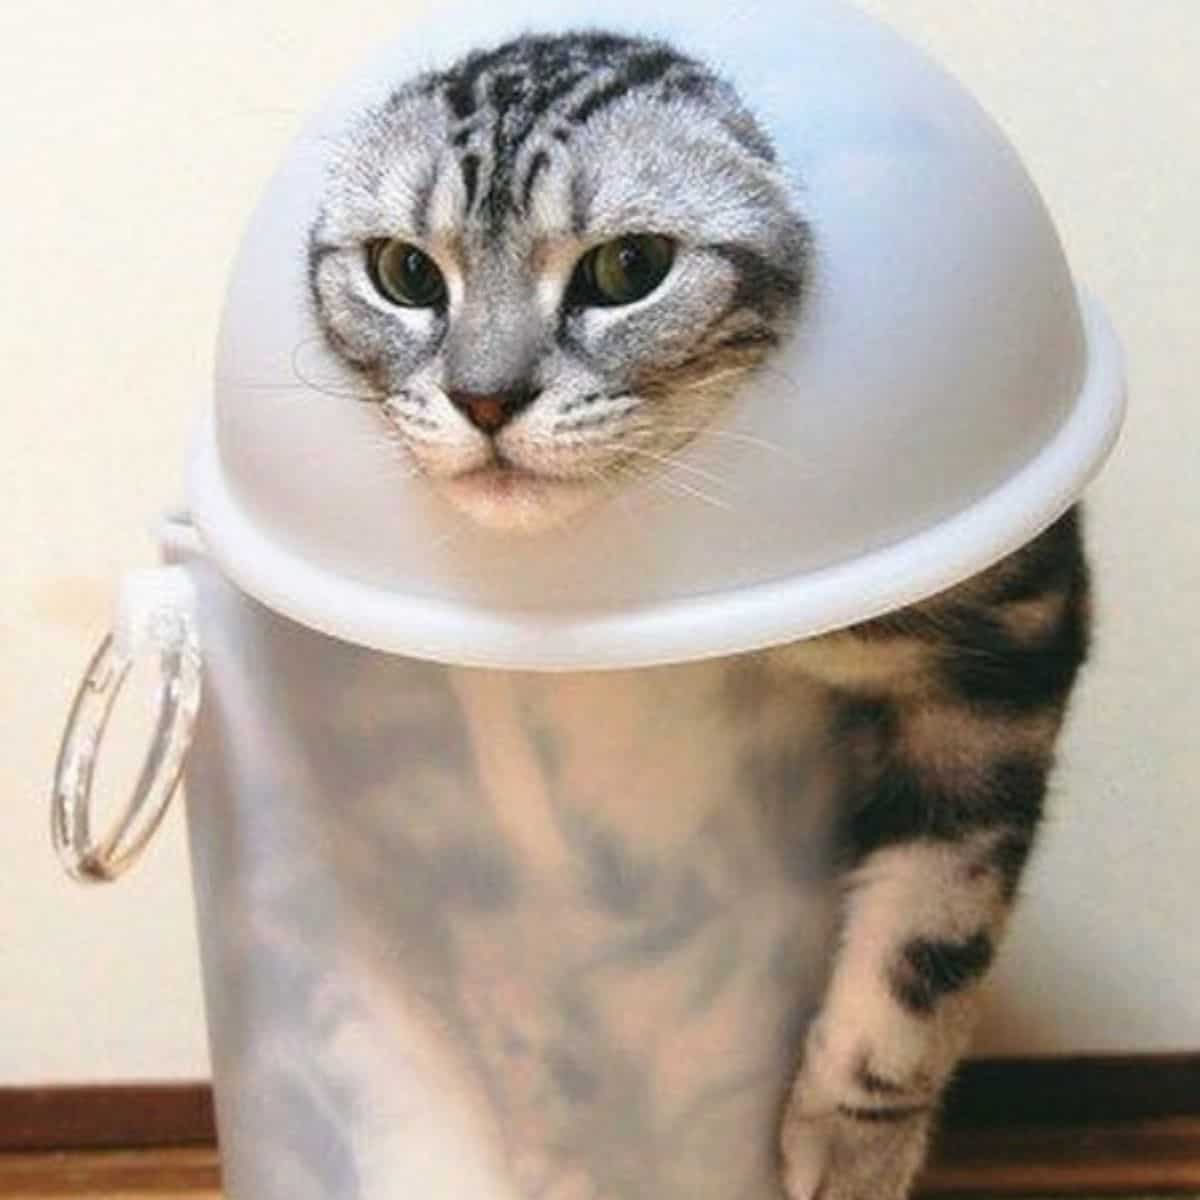 cat's head sticking out of a container